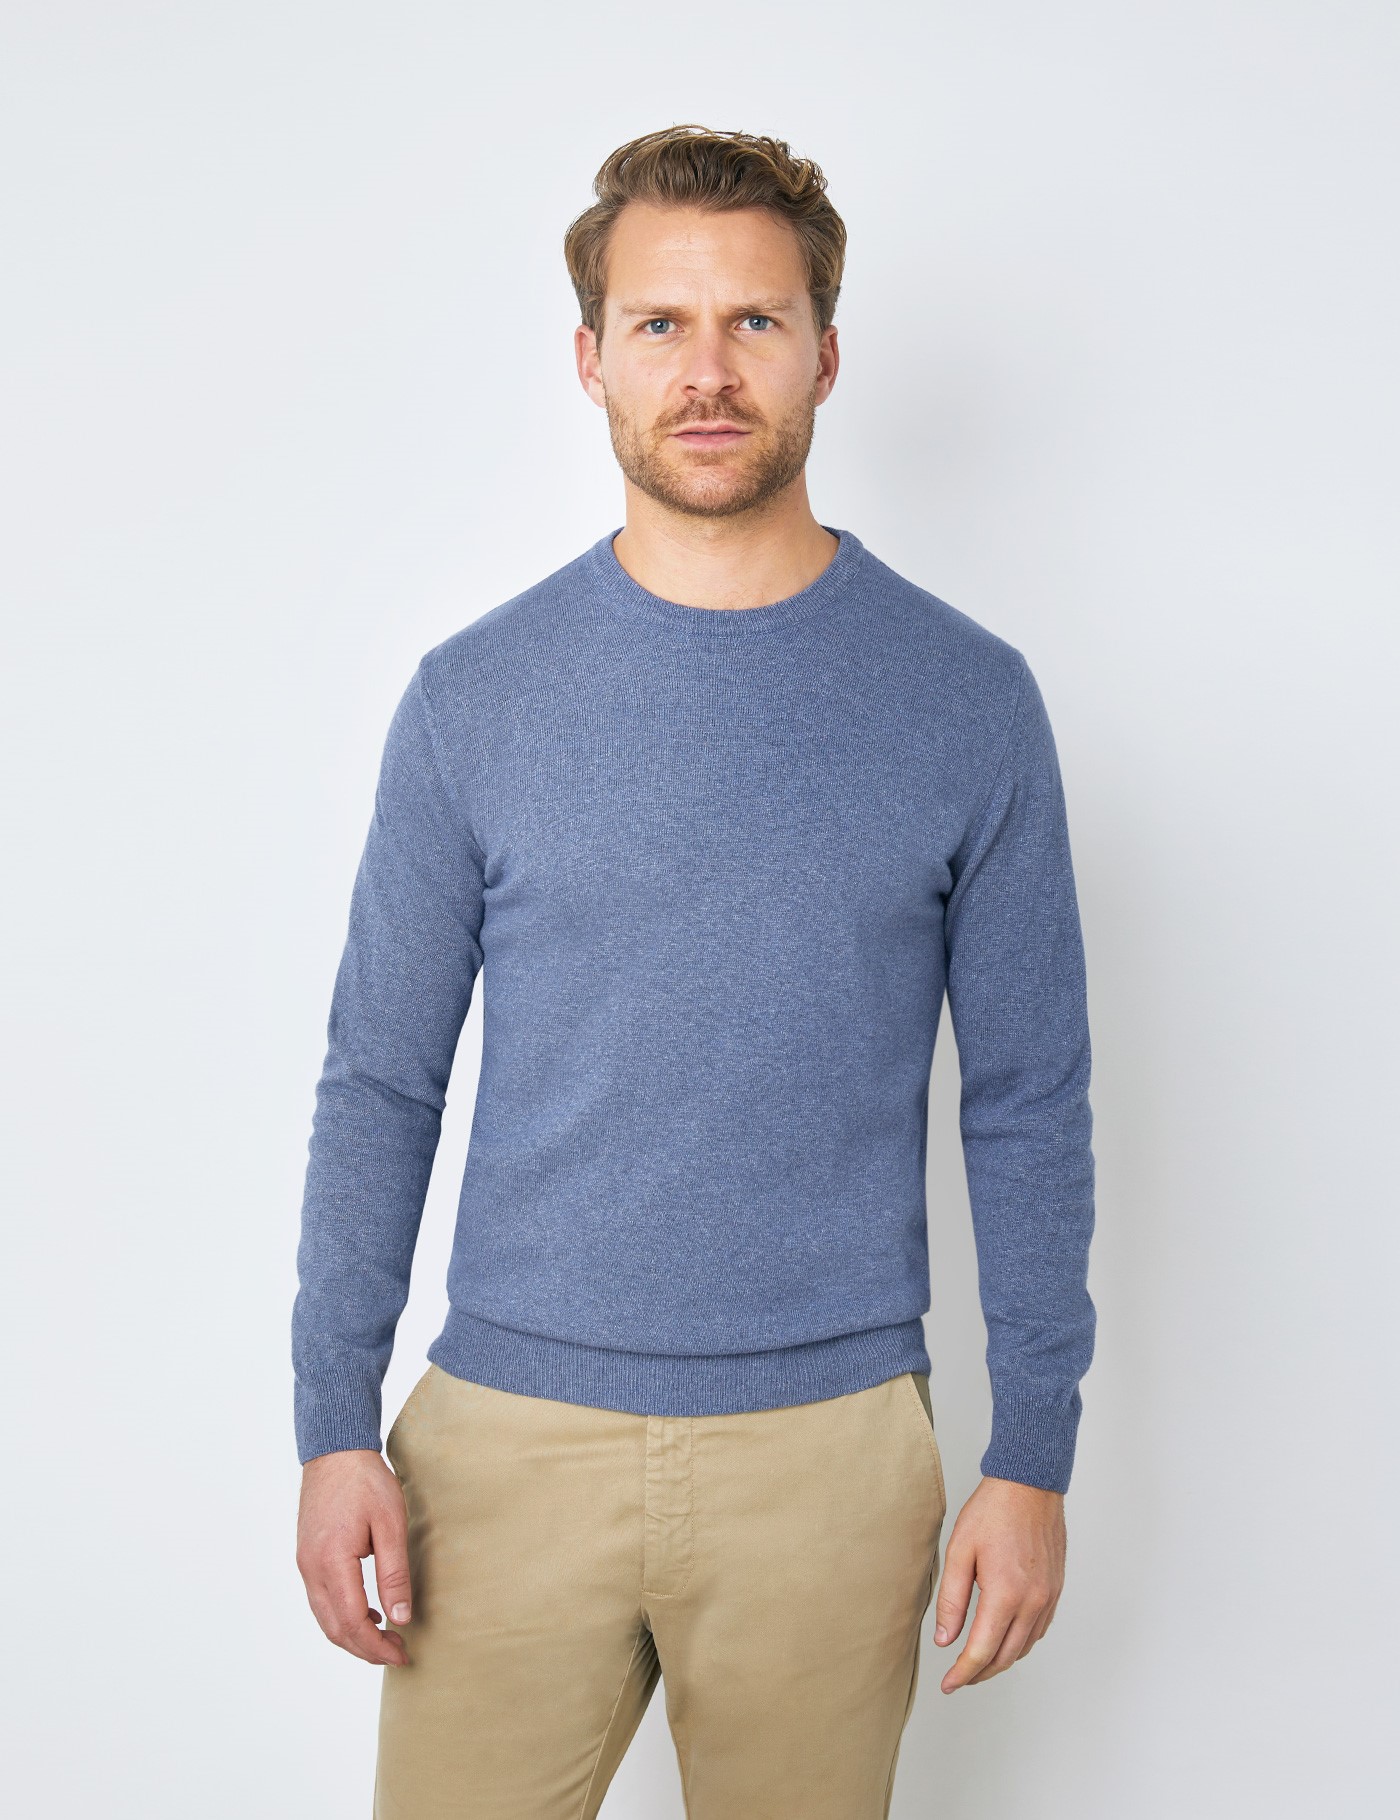 Wool and Cashmere Mix Crew Neck Sweater in Denim | Hawes & Curtis | USA